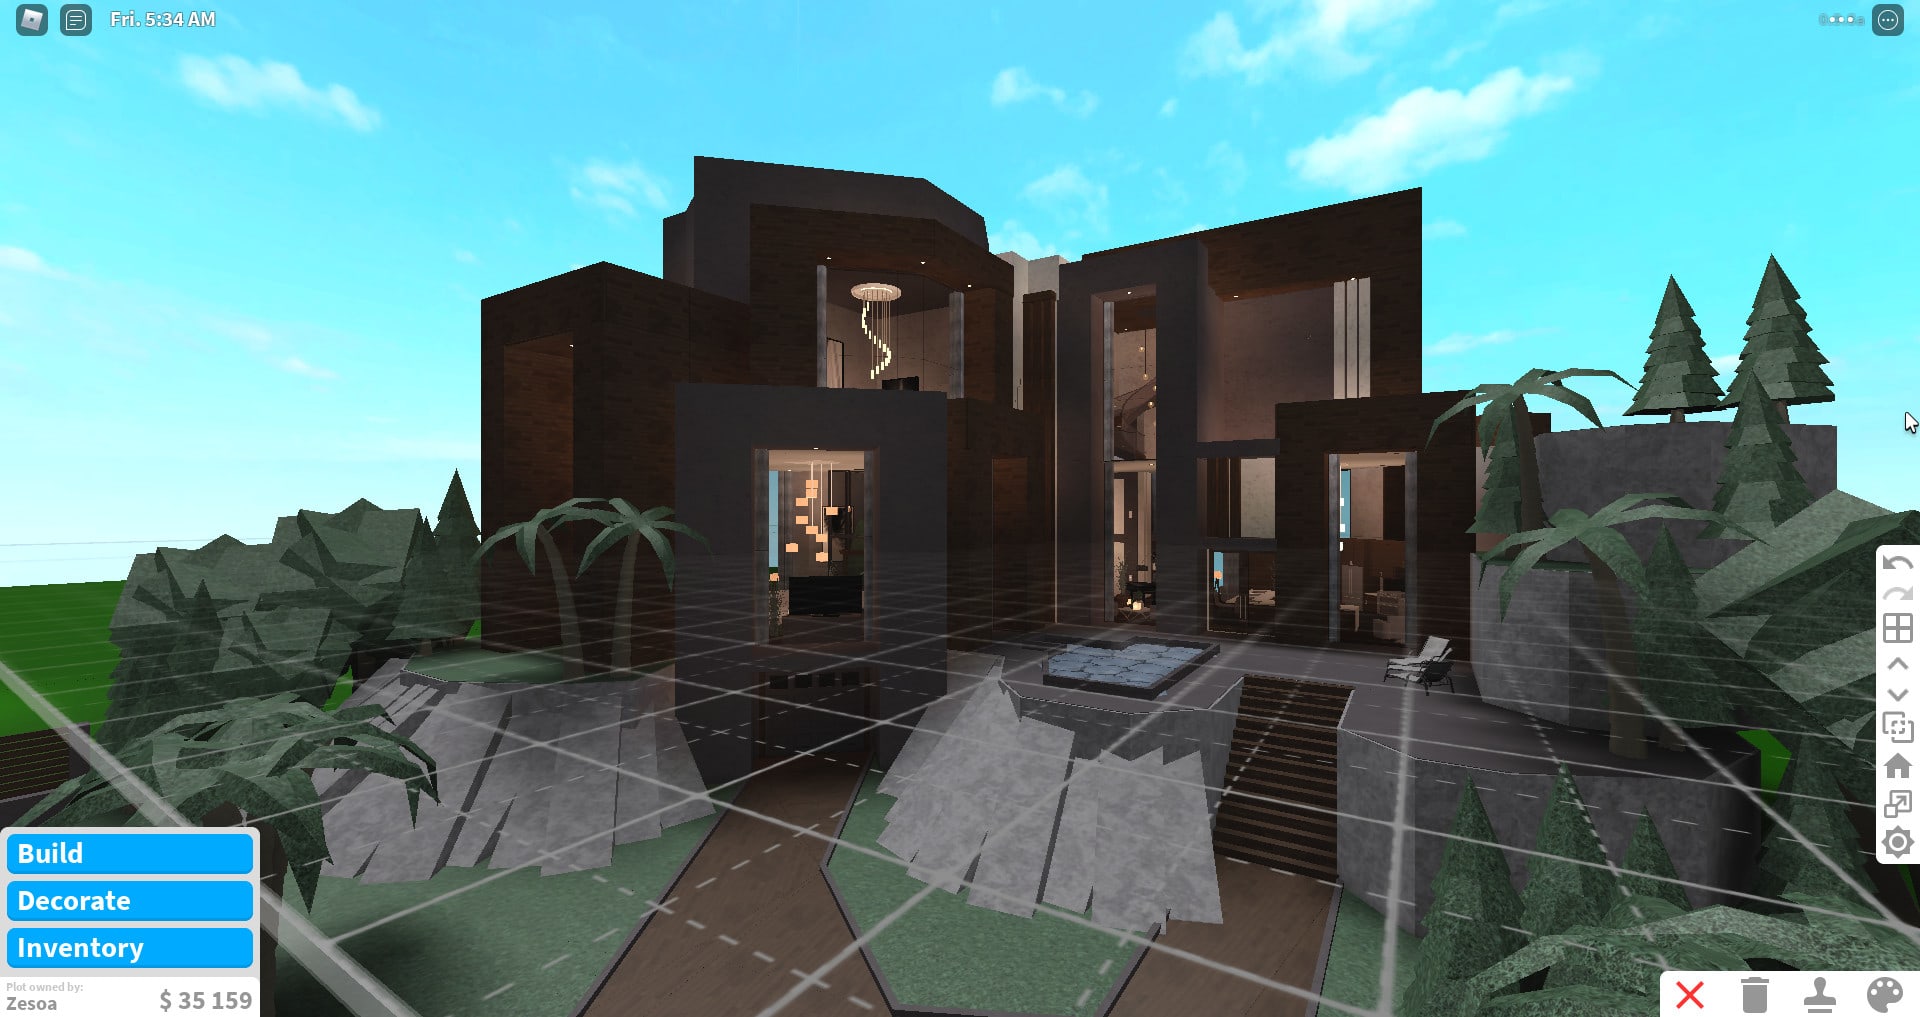 Build you a house from a speed build in roblox bloxburg by Blisscore_